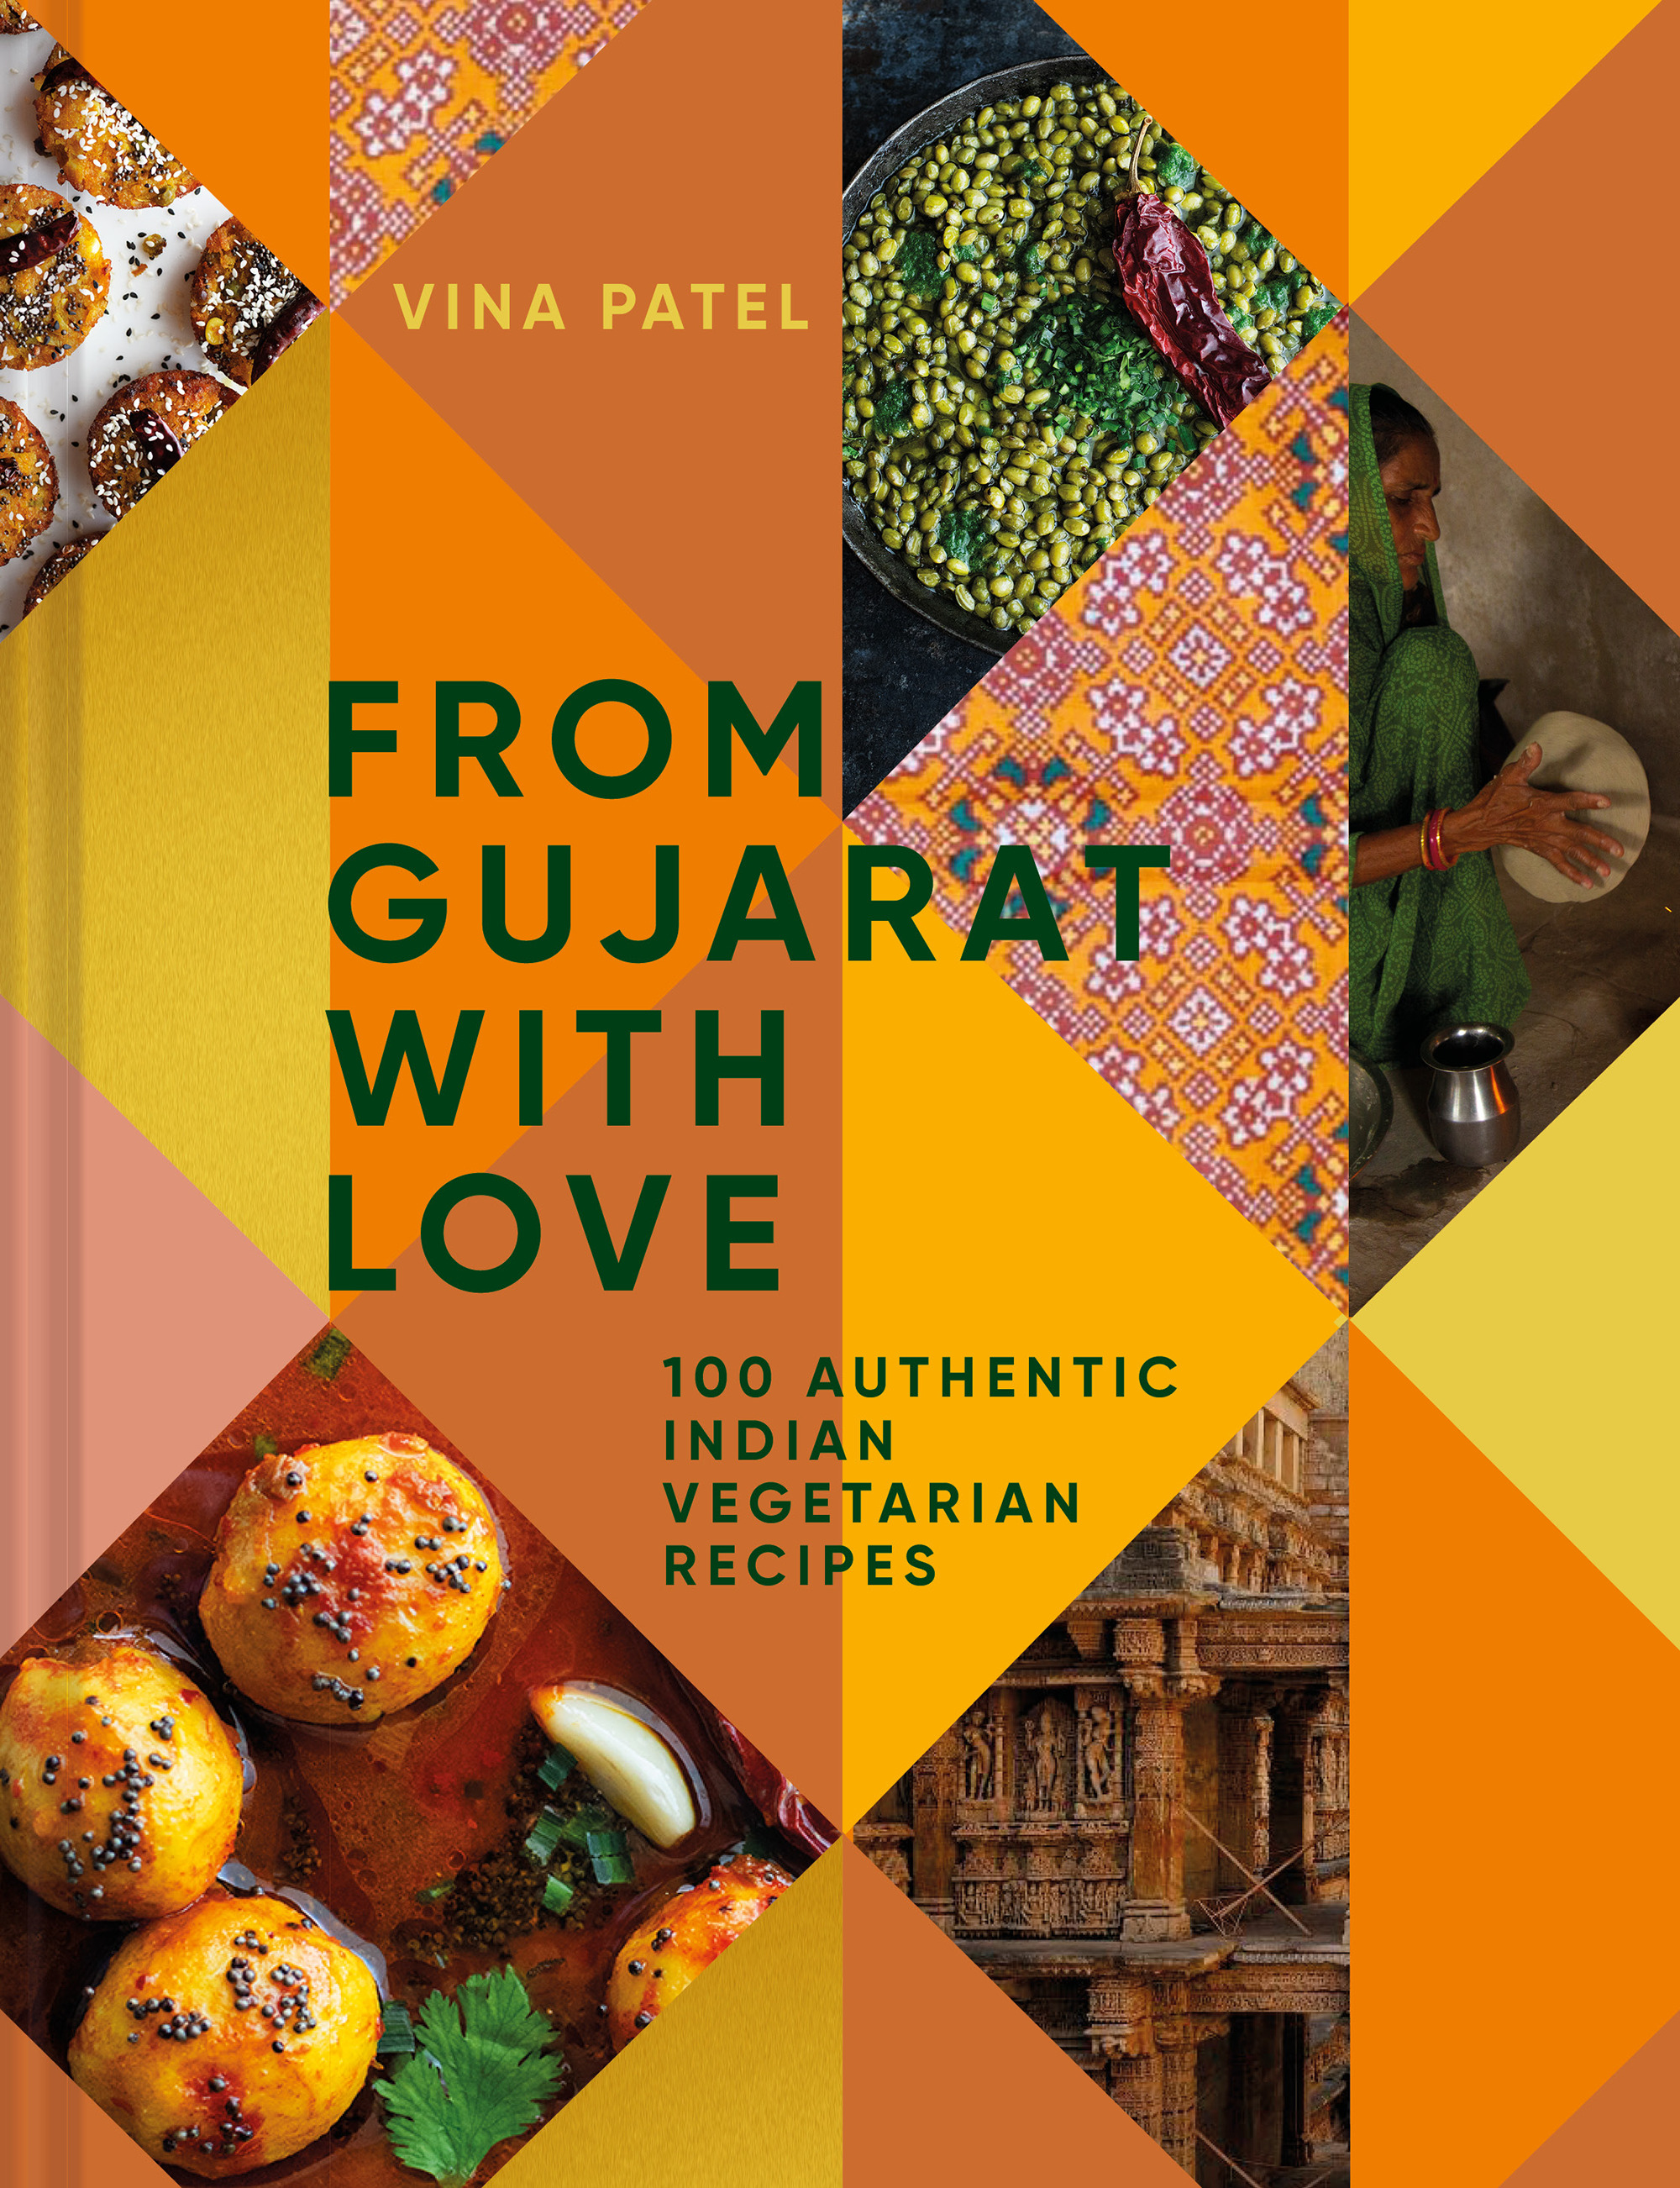 From Gujarat With Love: 100 Authentic Indian Vegetarian Recipes | Cookbook